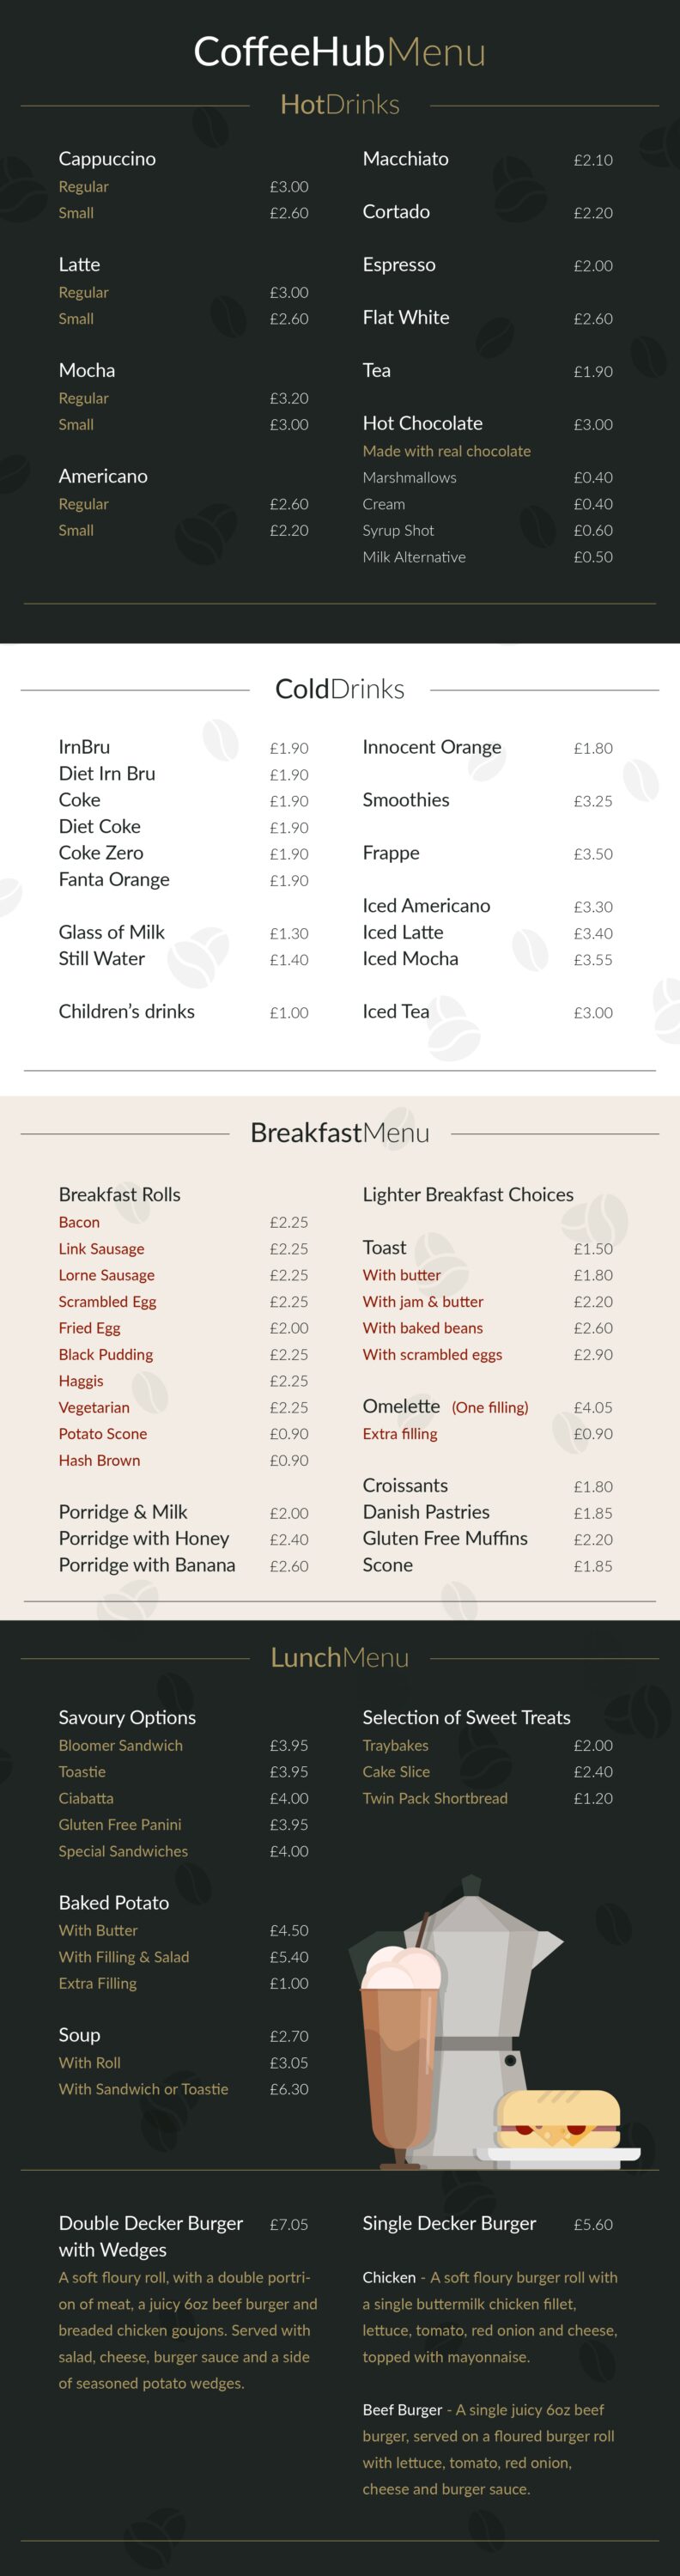 Full price list and menu available at the CoffeeHub